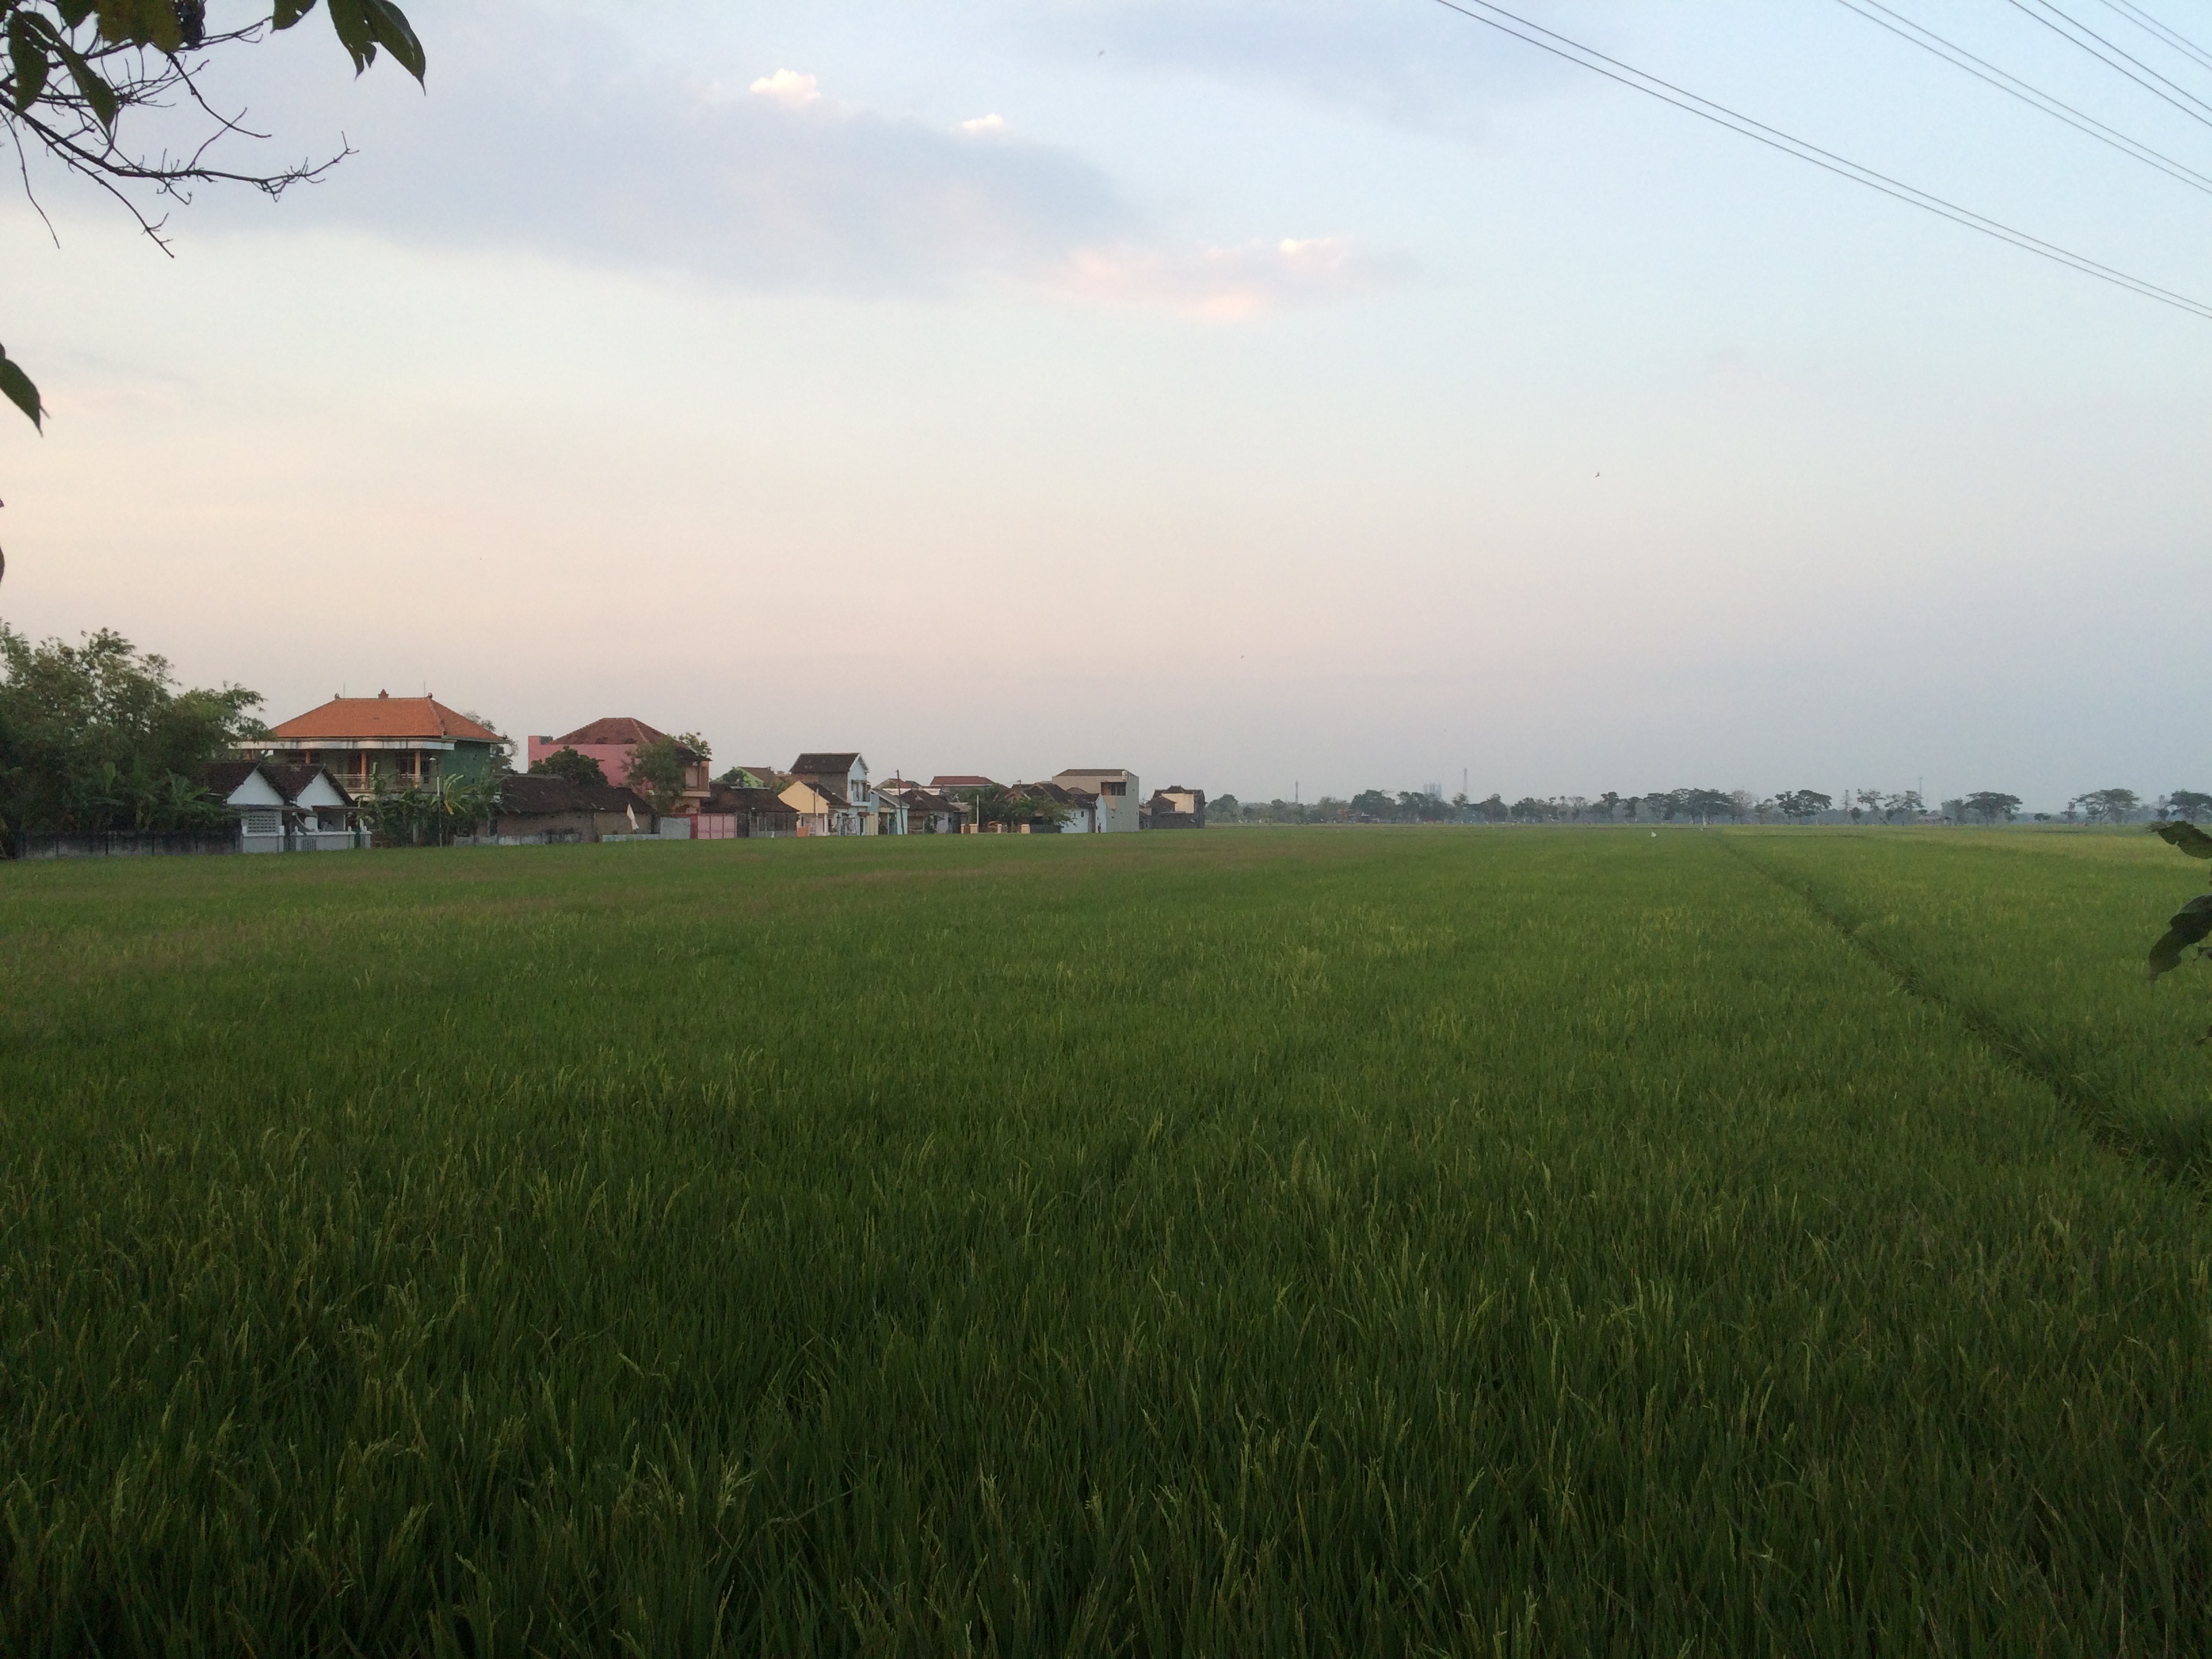 Lush fields which I presume to be of rice.